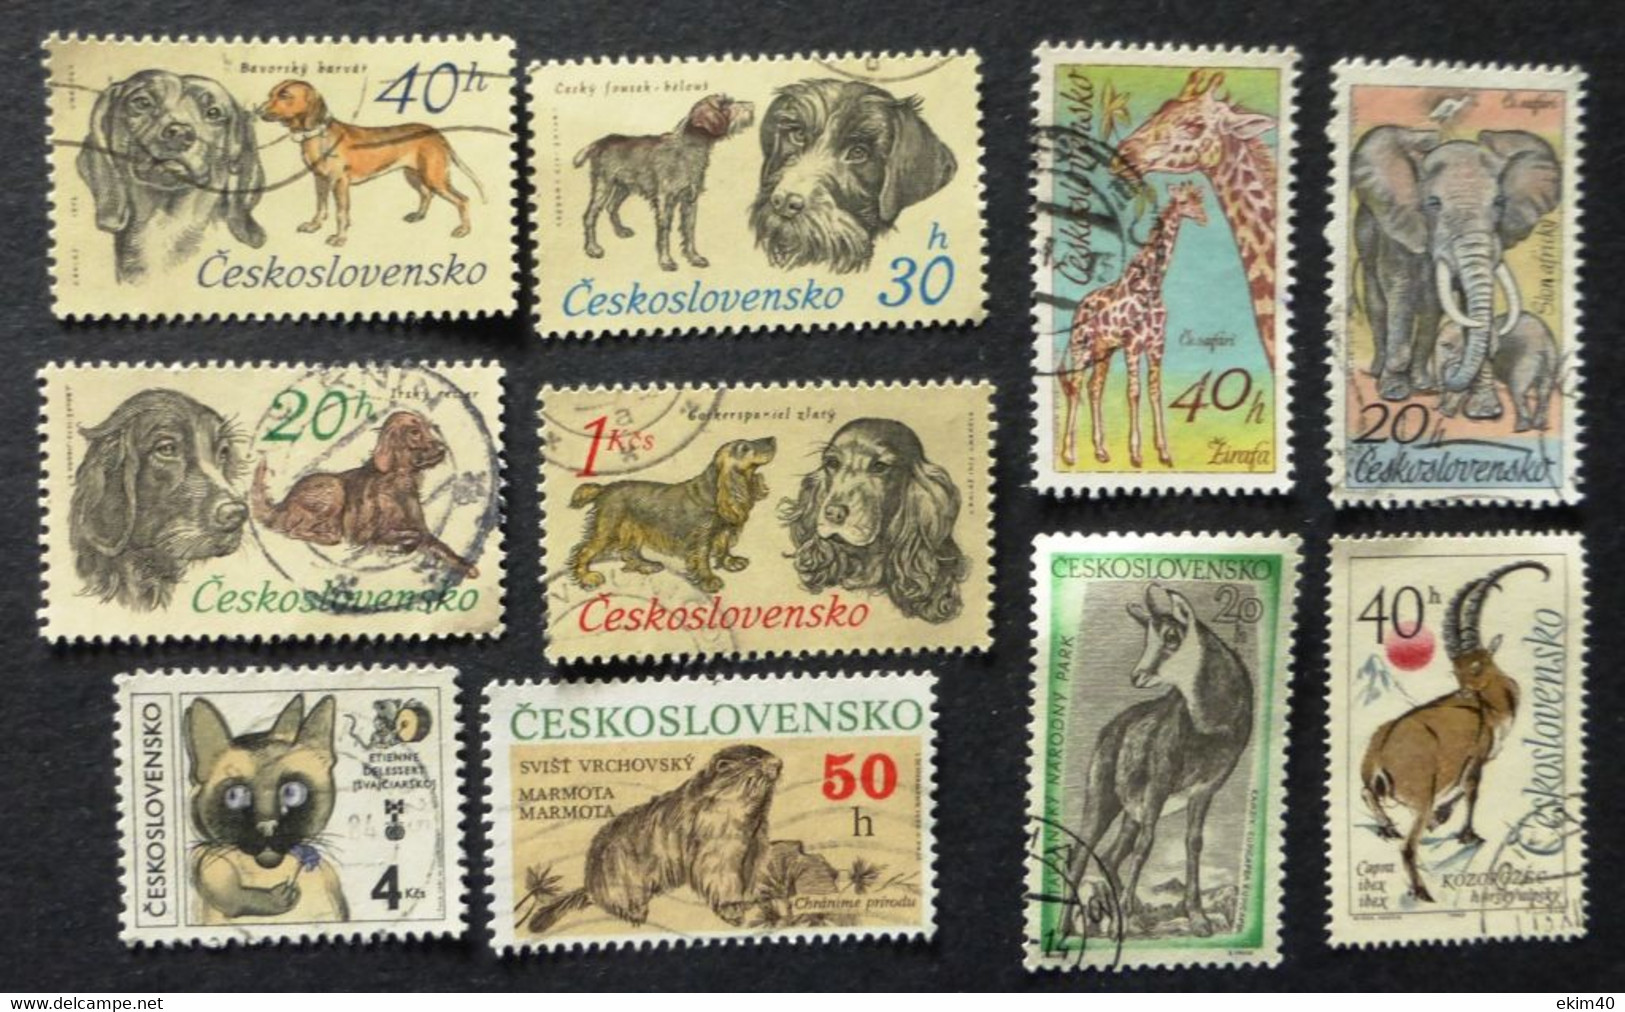 Selection Of Used/Cancelled Stamps From Czechoslovakia Wild & Domestic Animals. No DC-323 - Used Stamps